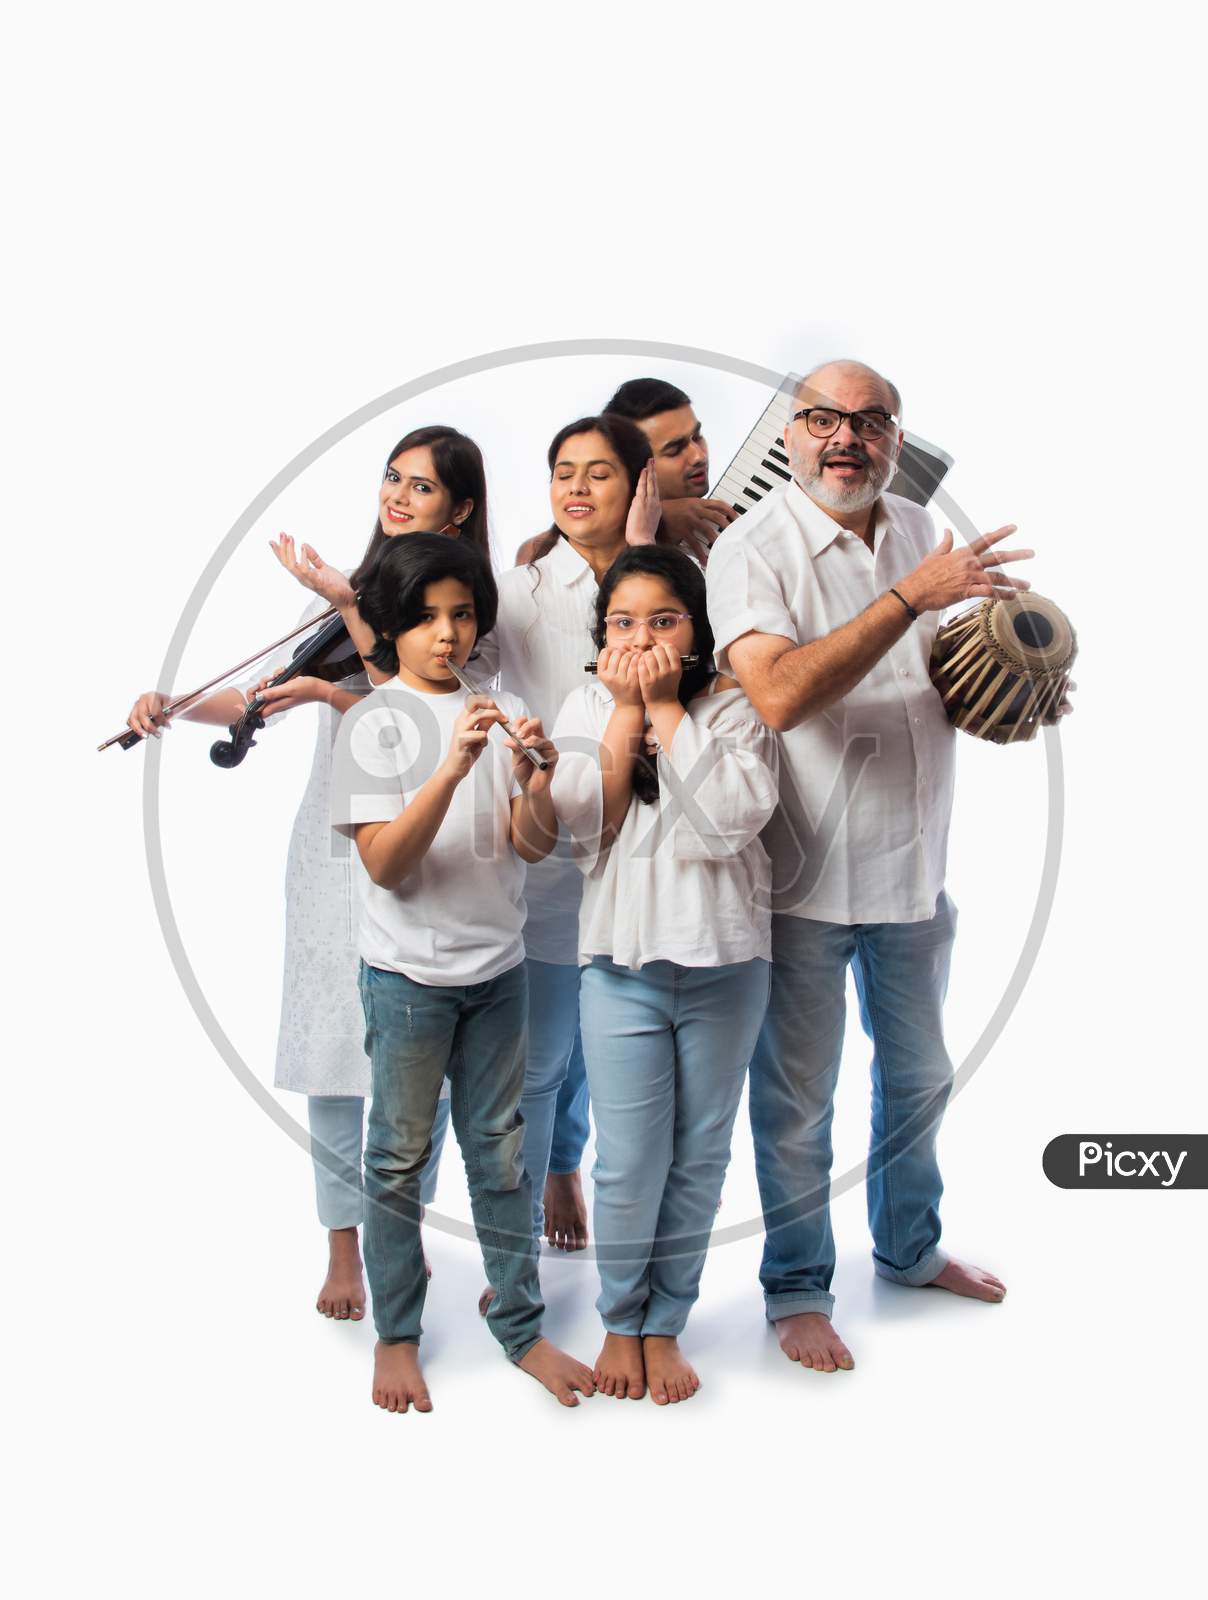 Indian Family Playing Music Instruments Together As A Band, Performing Against White